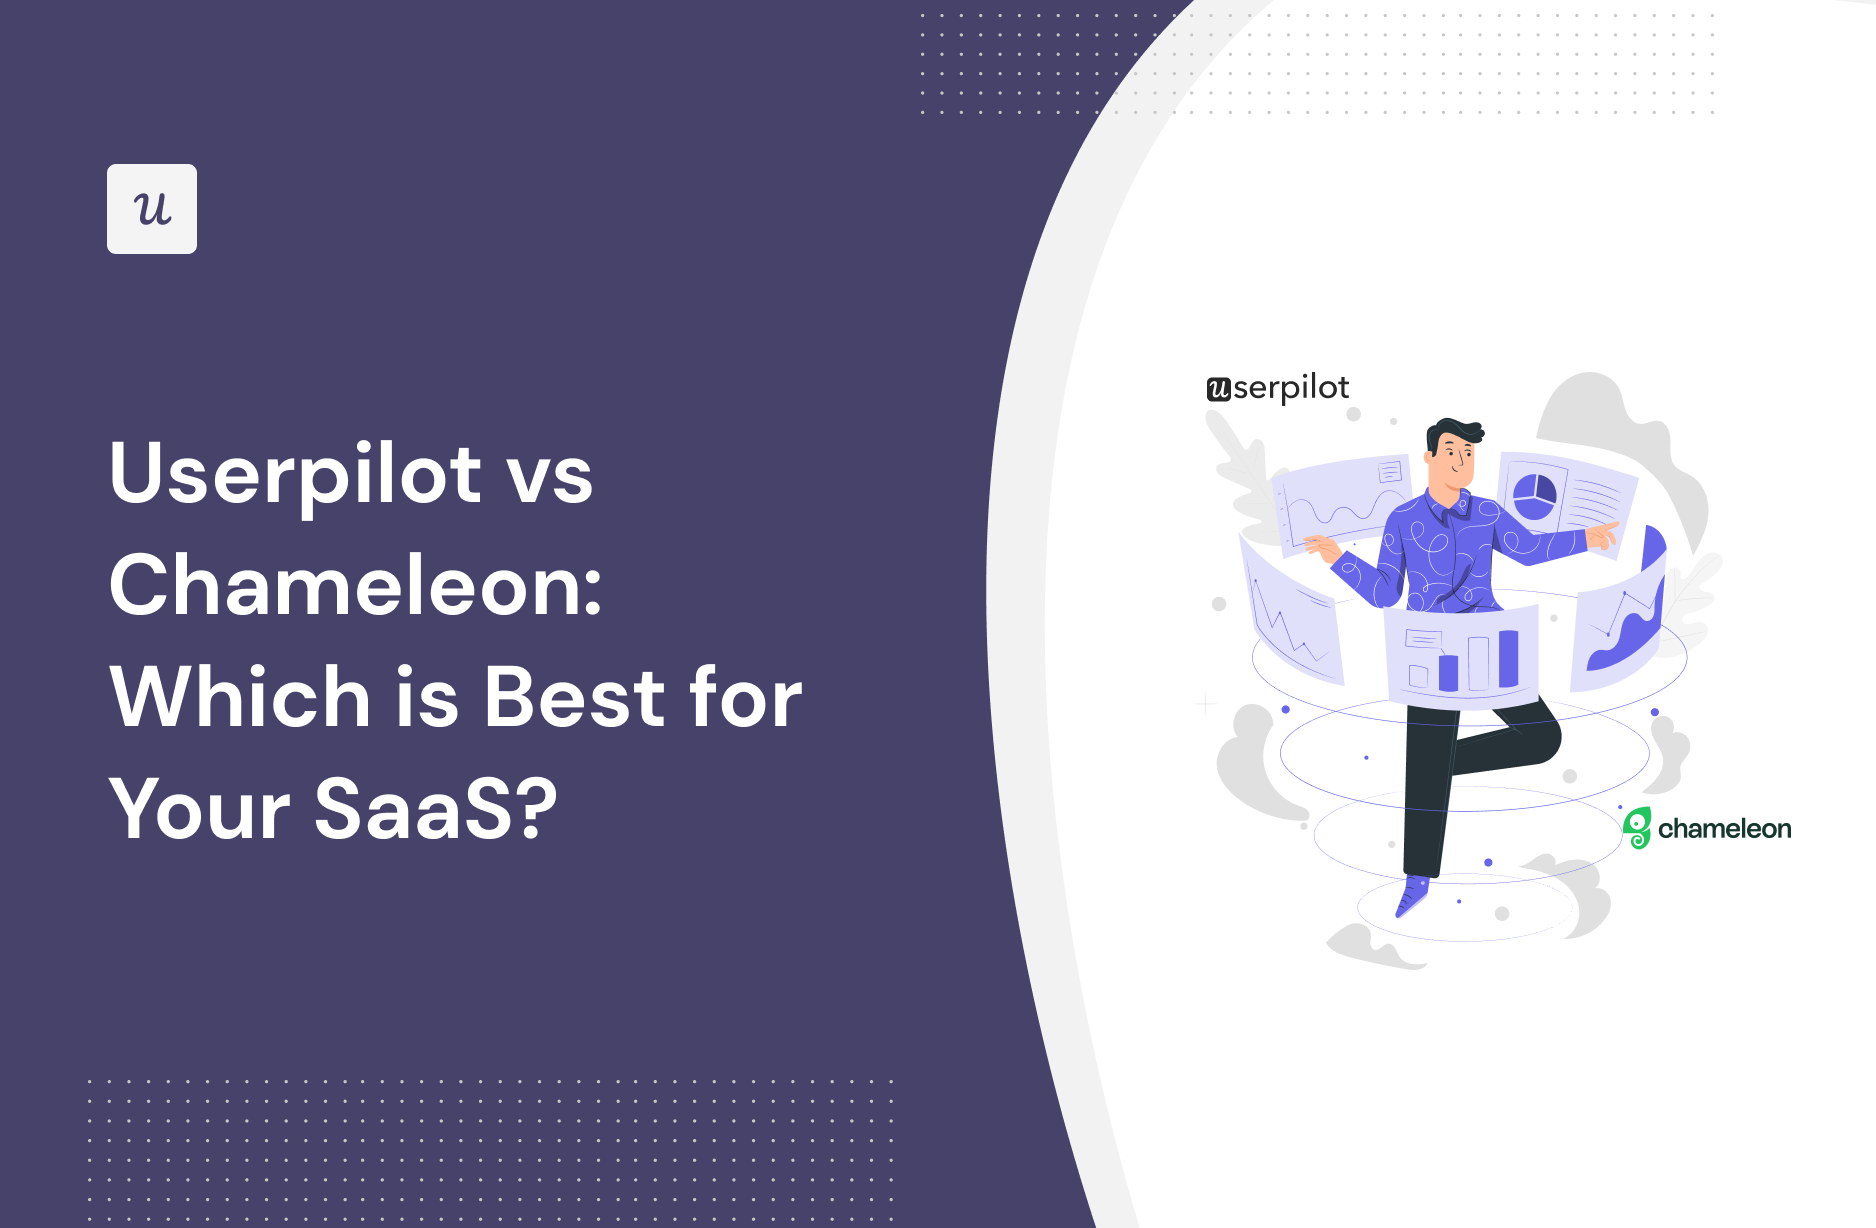 Userpilot vs Chameleon: Which Is Best for Your SaaS?